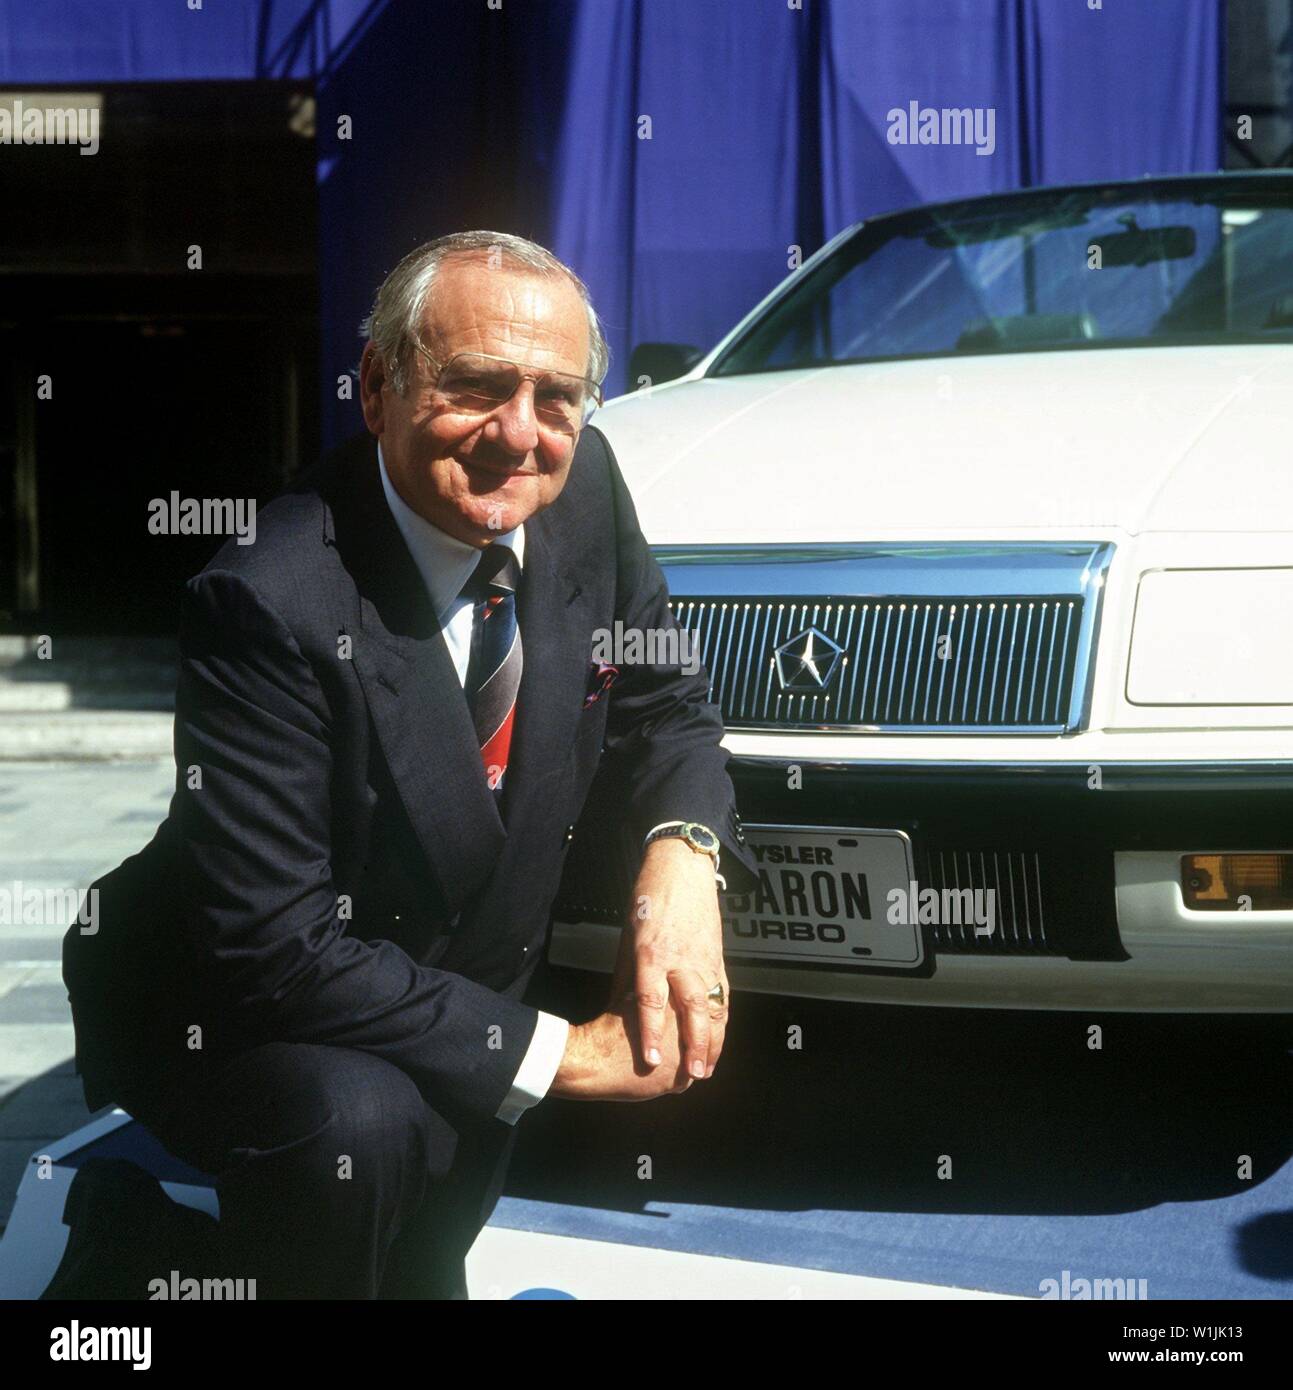 The management chairman of the American automotive group Chrysler, Lee Iacocca, taken on September 8, 1987 at the International Motor Show (IAA) in Frankfurt am Main in front of a Chrysler model. | usage worldwide Stock Photo